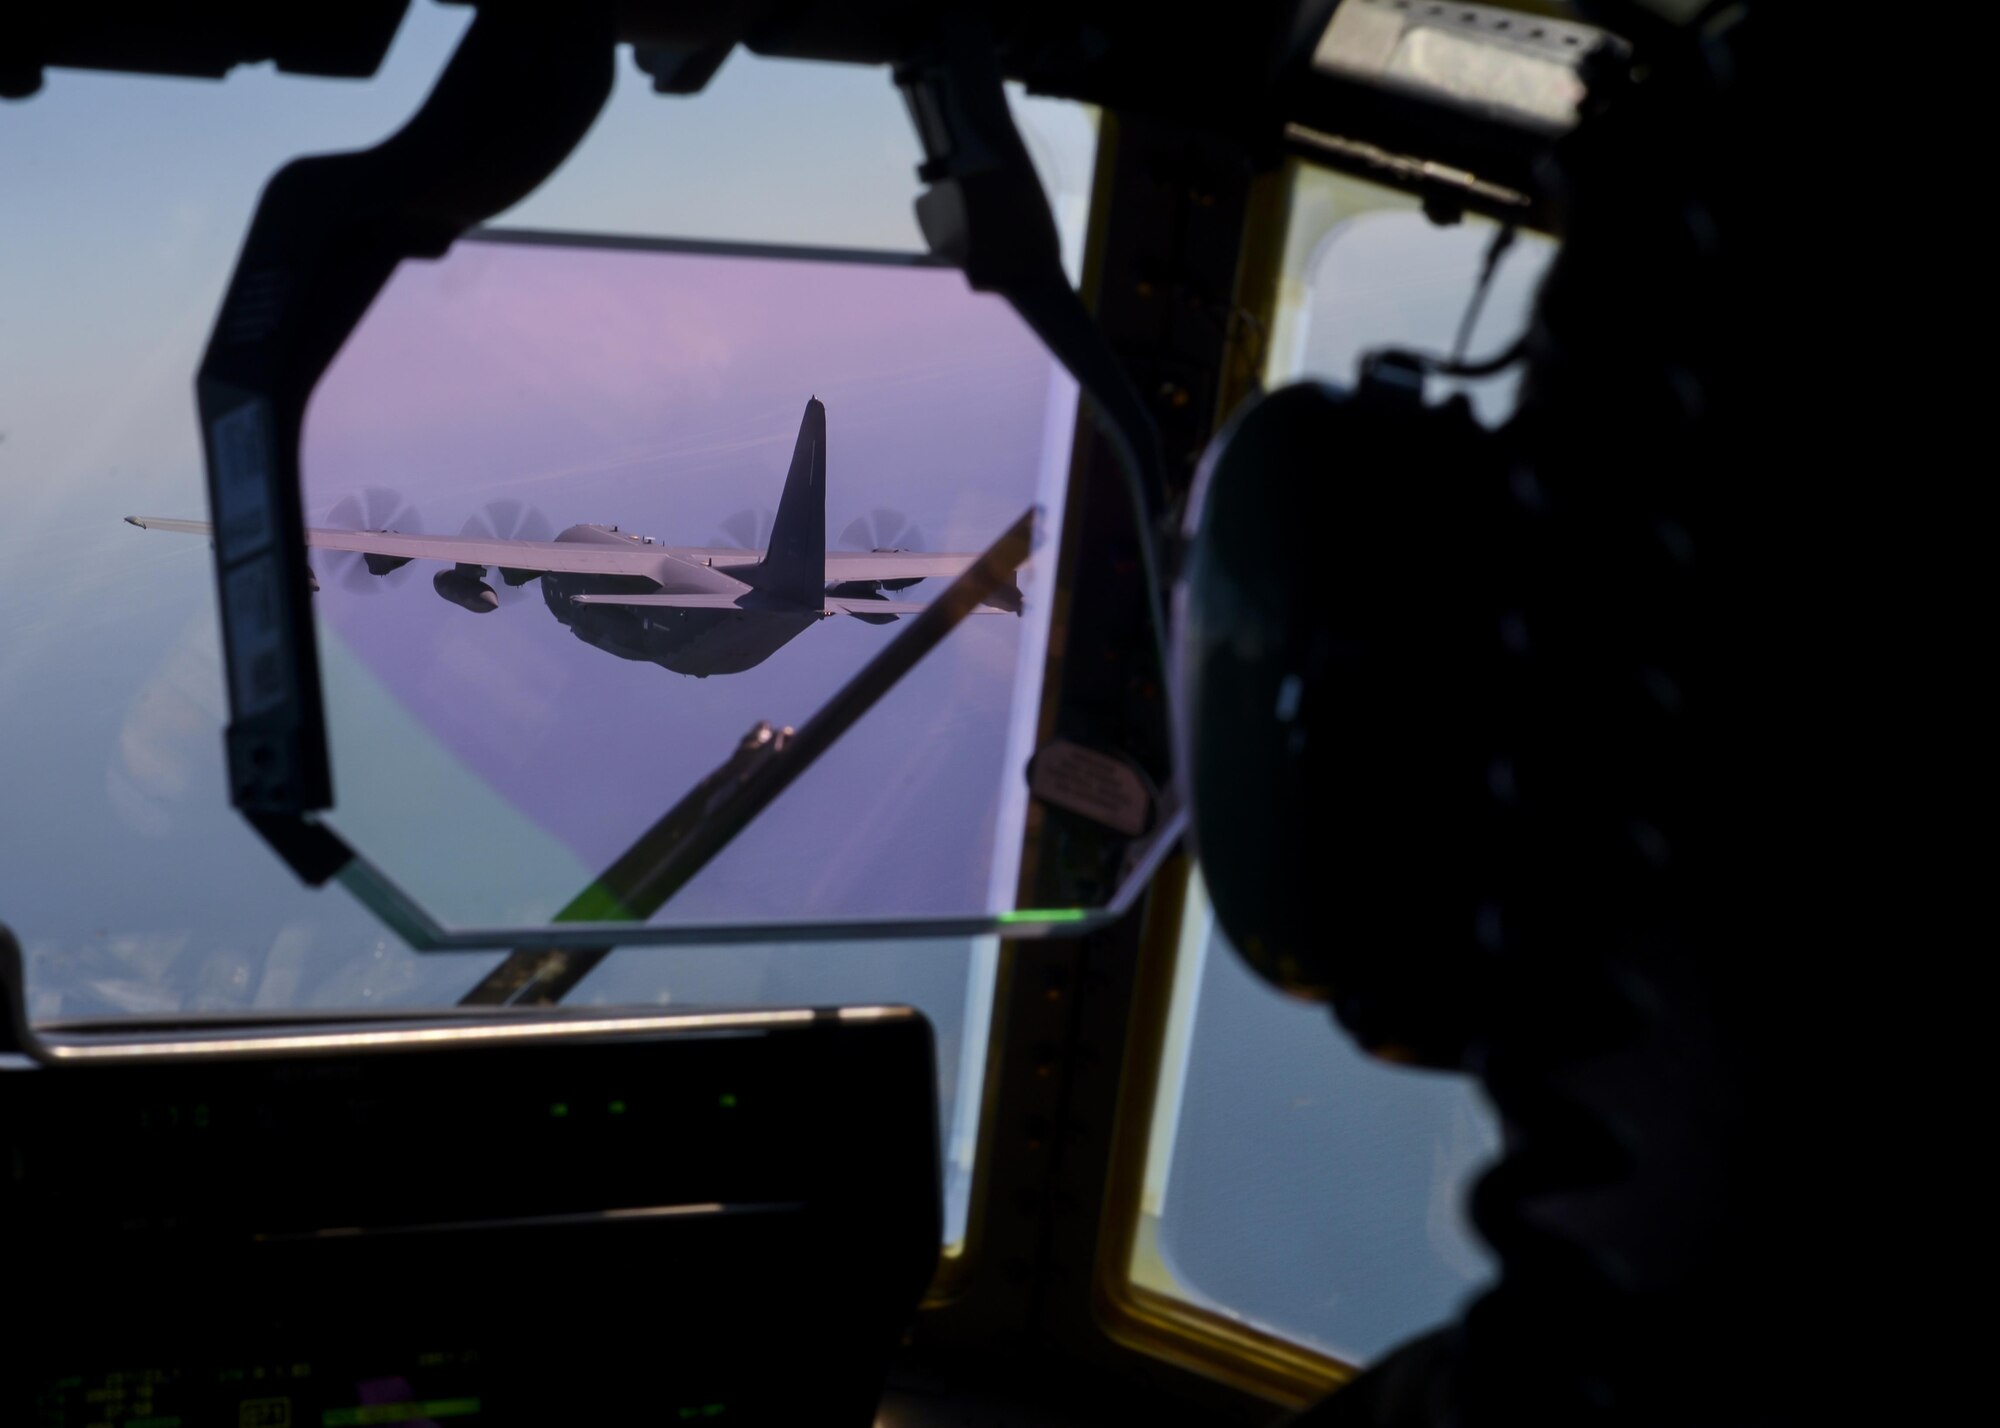 A U.S. Air Force MC-130J Commando II flies over the Black Sea off the coast of Bulgaria during an exercise April 16, 2016. During the exercise the 67th Special Operations Squadron flew a total of eight sorties, carried 79,000 pounds of cargo and airdropped 50,000 pounds of equipment and personnel before returning to home station. (U.S. Air Force photo by Senior Airman Victoria H. Taylor/Released)